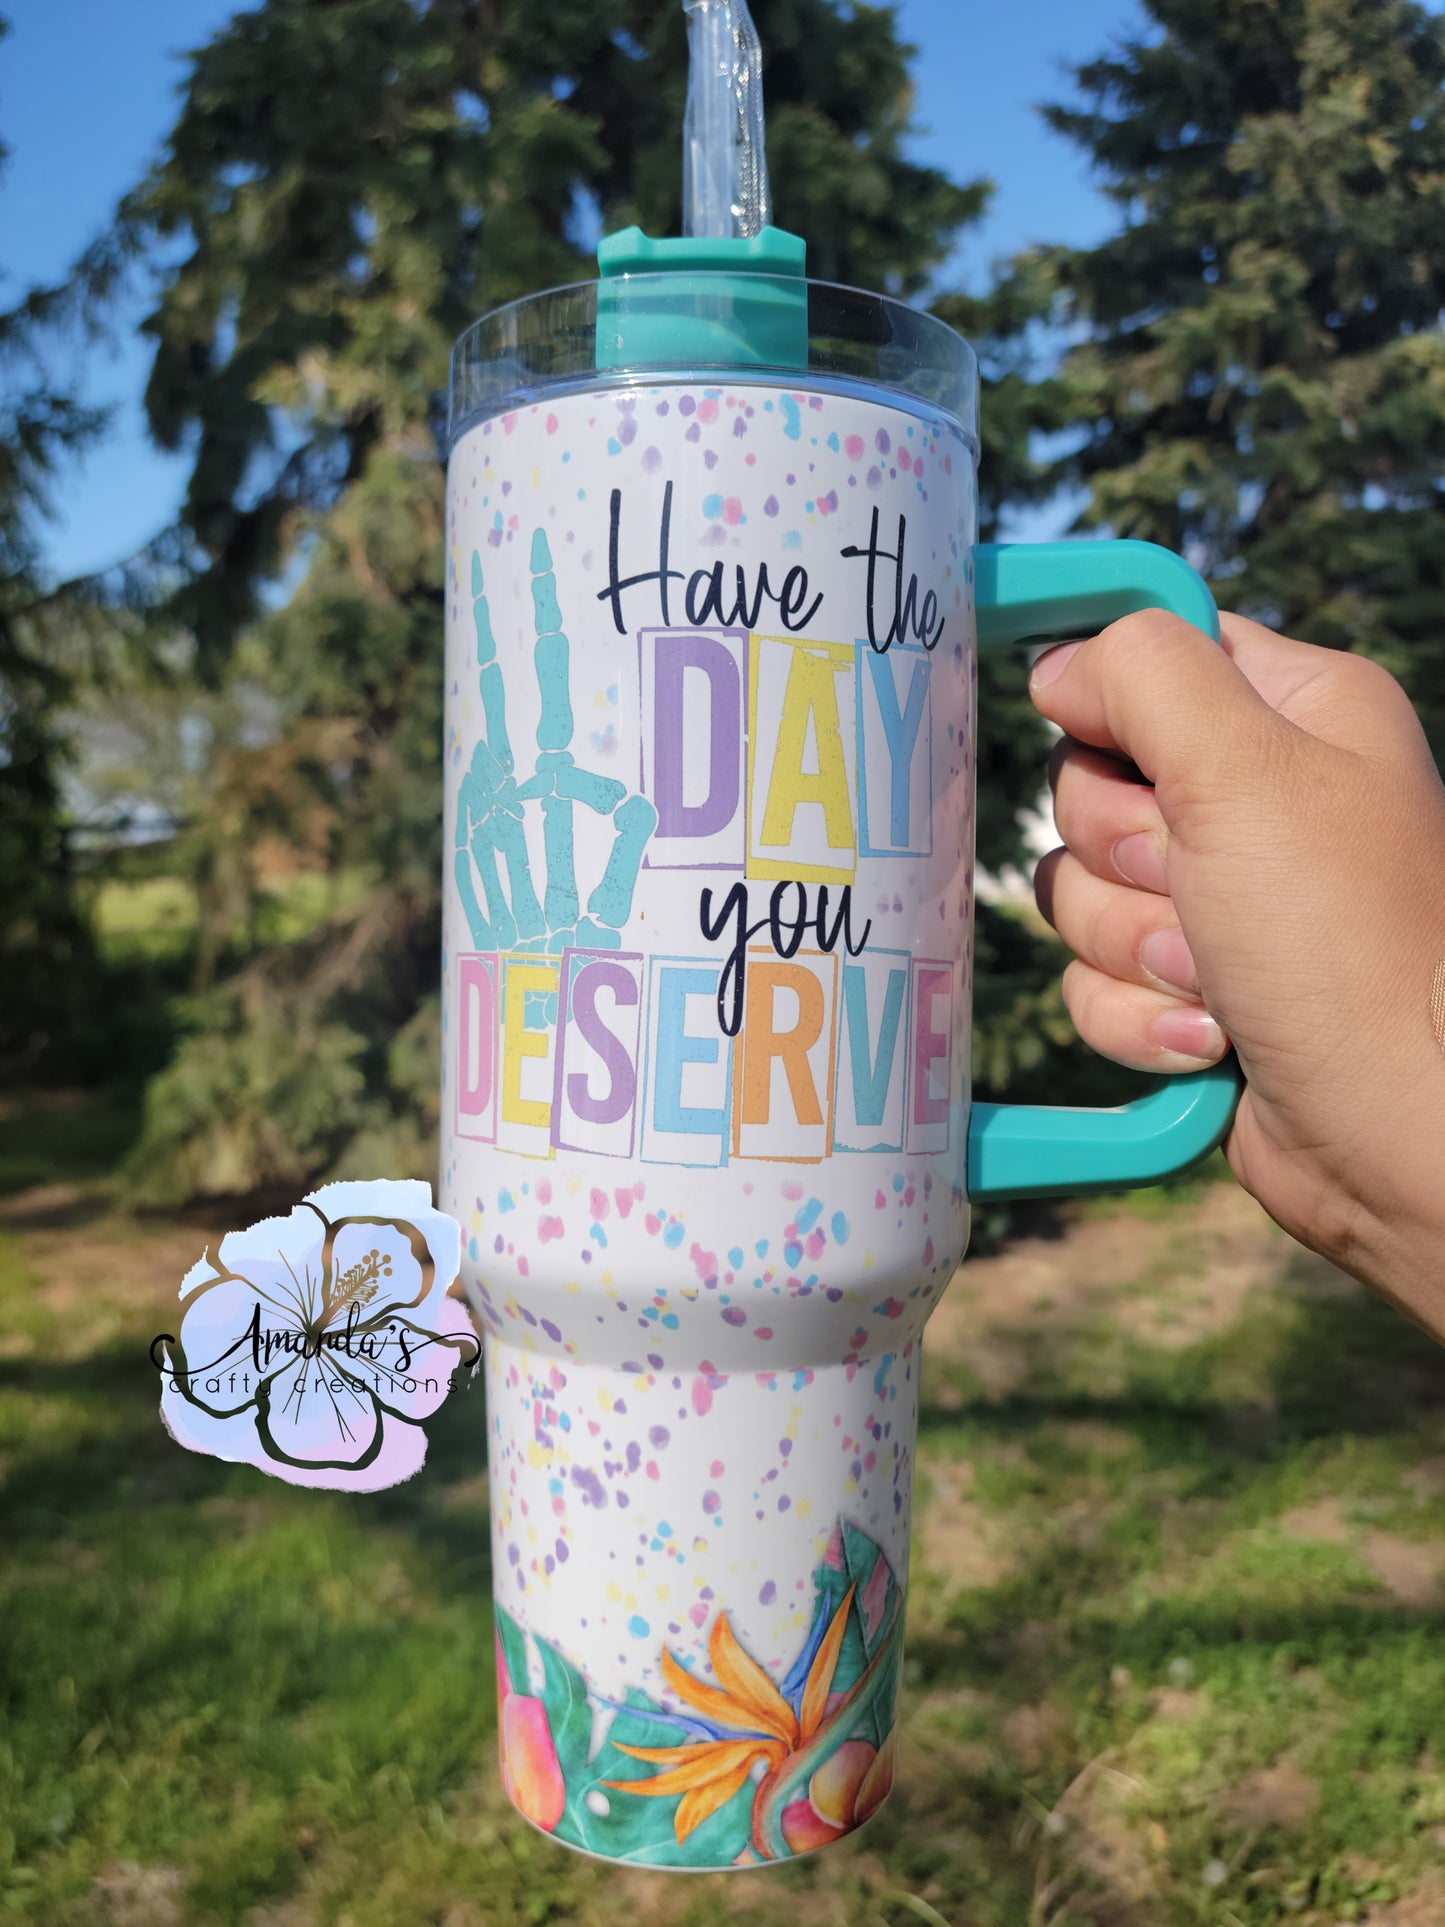 Design Your Own 40 oz Tumbler with Handle